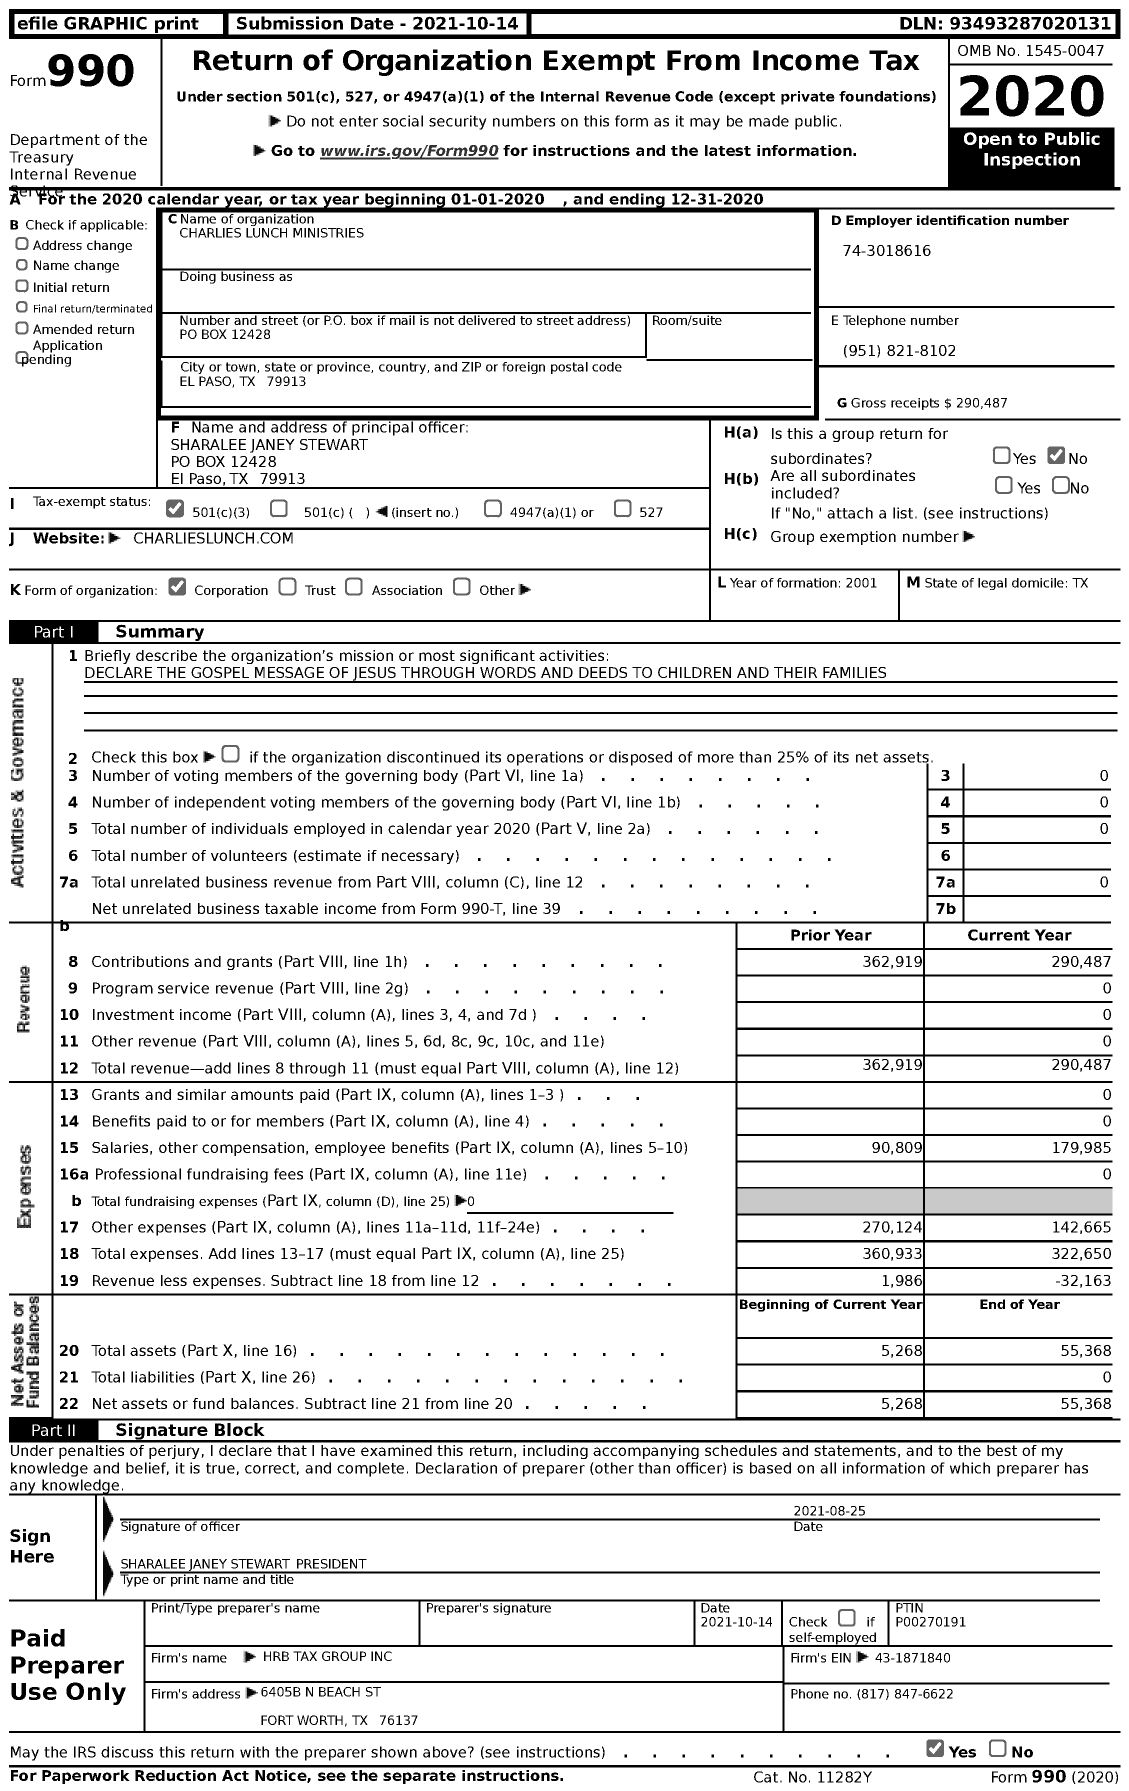 Image of first page of 2020 Form 990 for Charlies Lunch Ministries